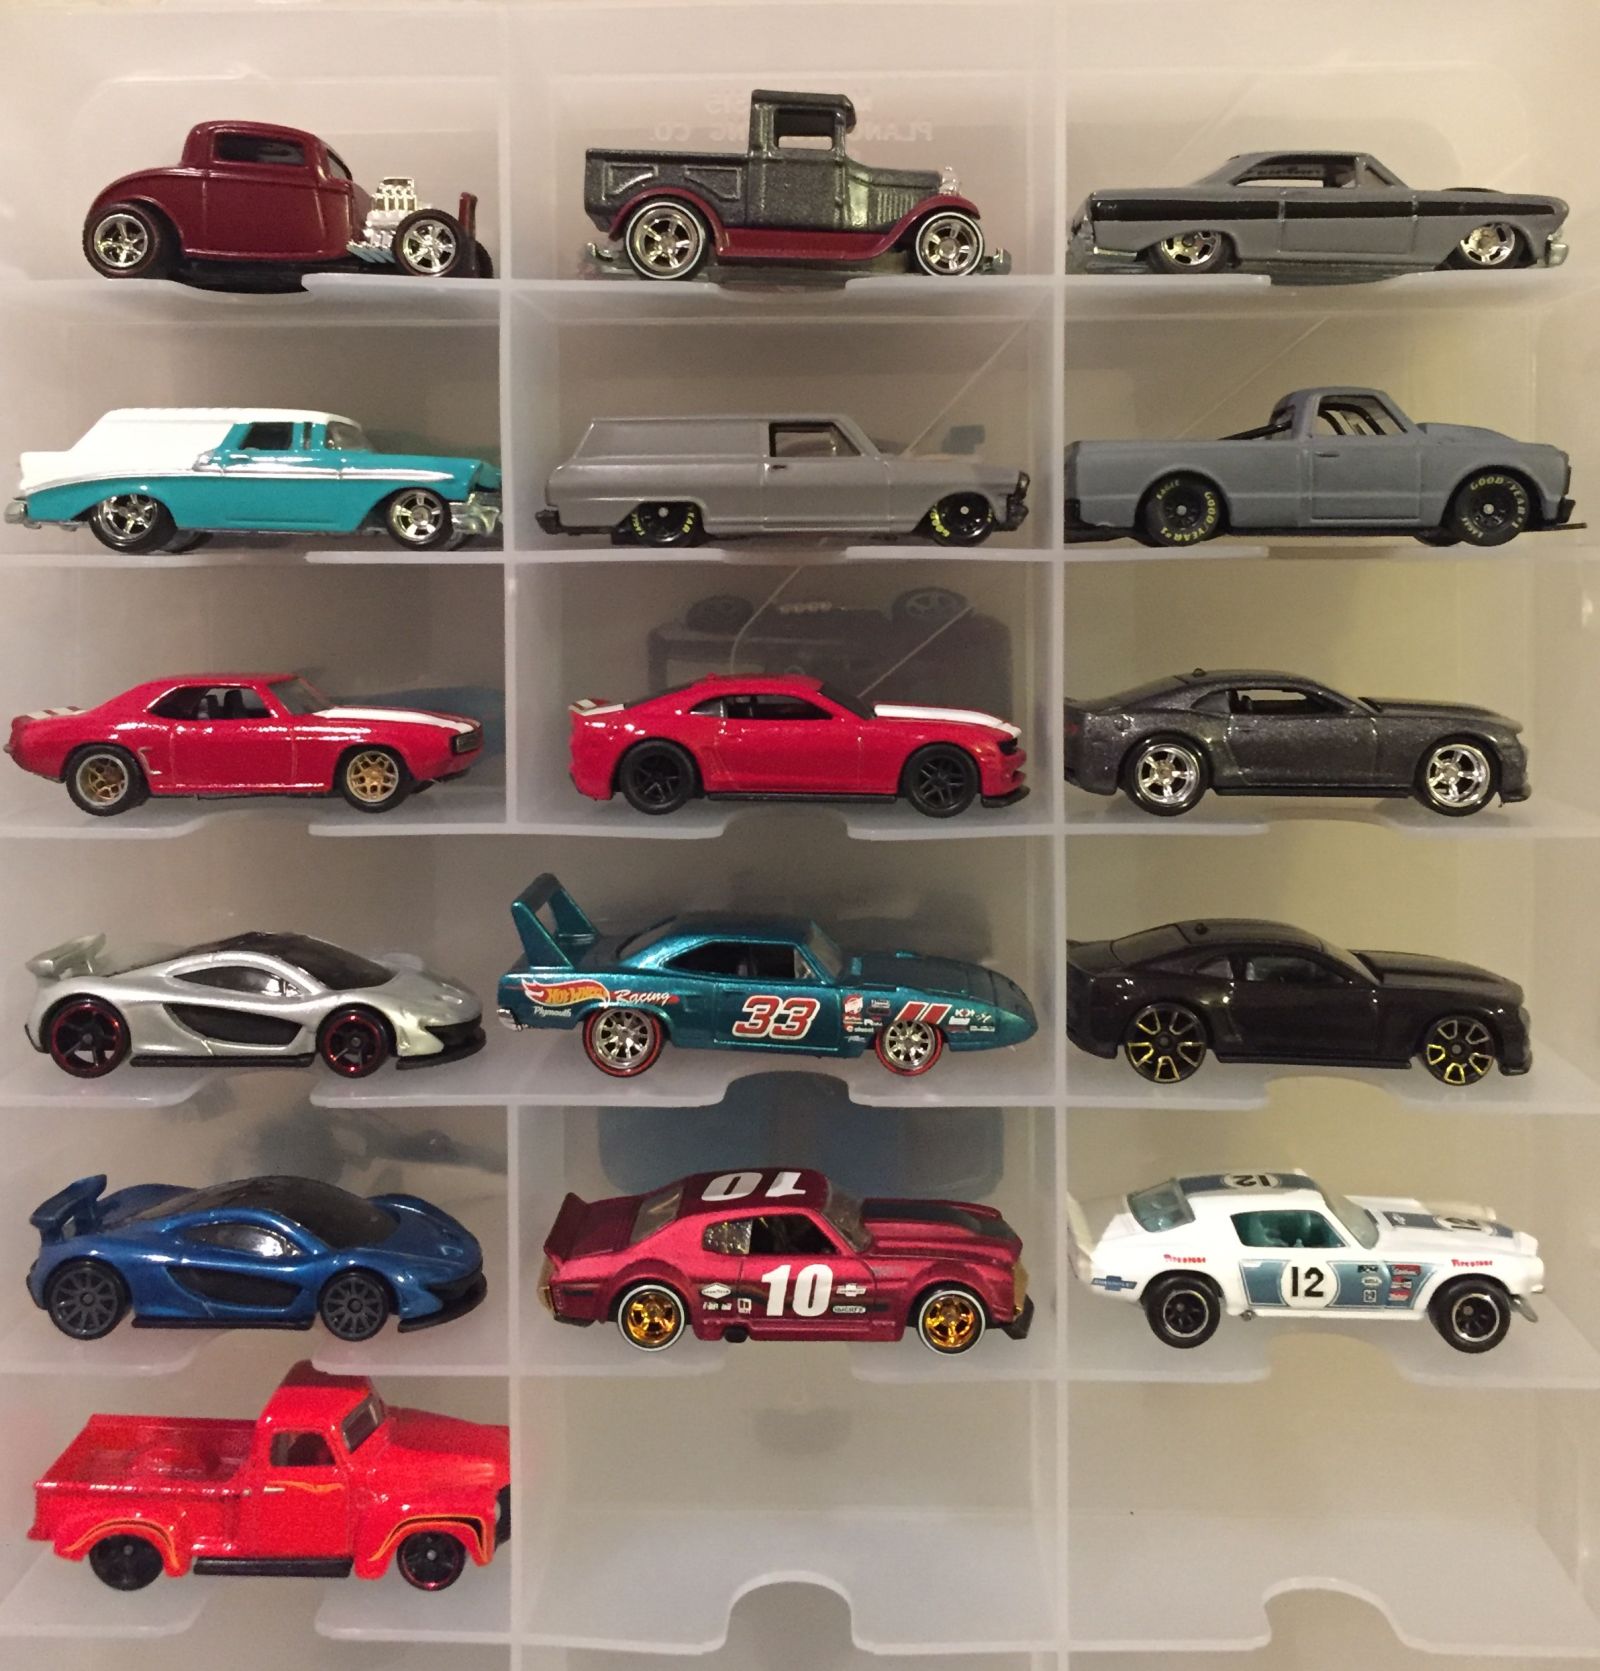 Just a photo of all my customs and wheel swaps I’ve done since joining. 